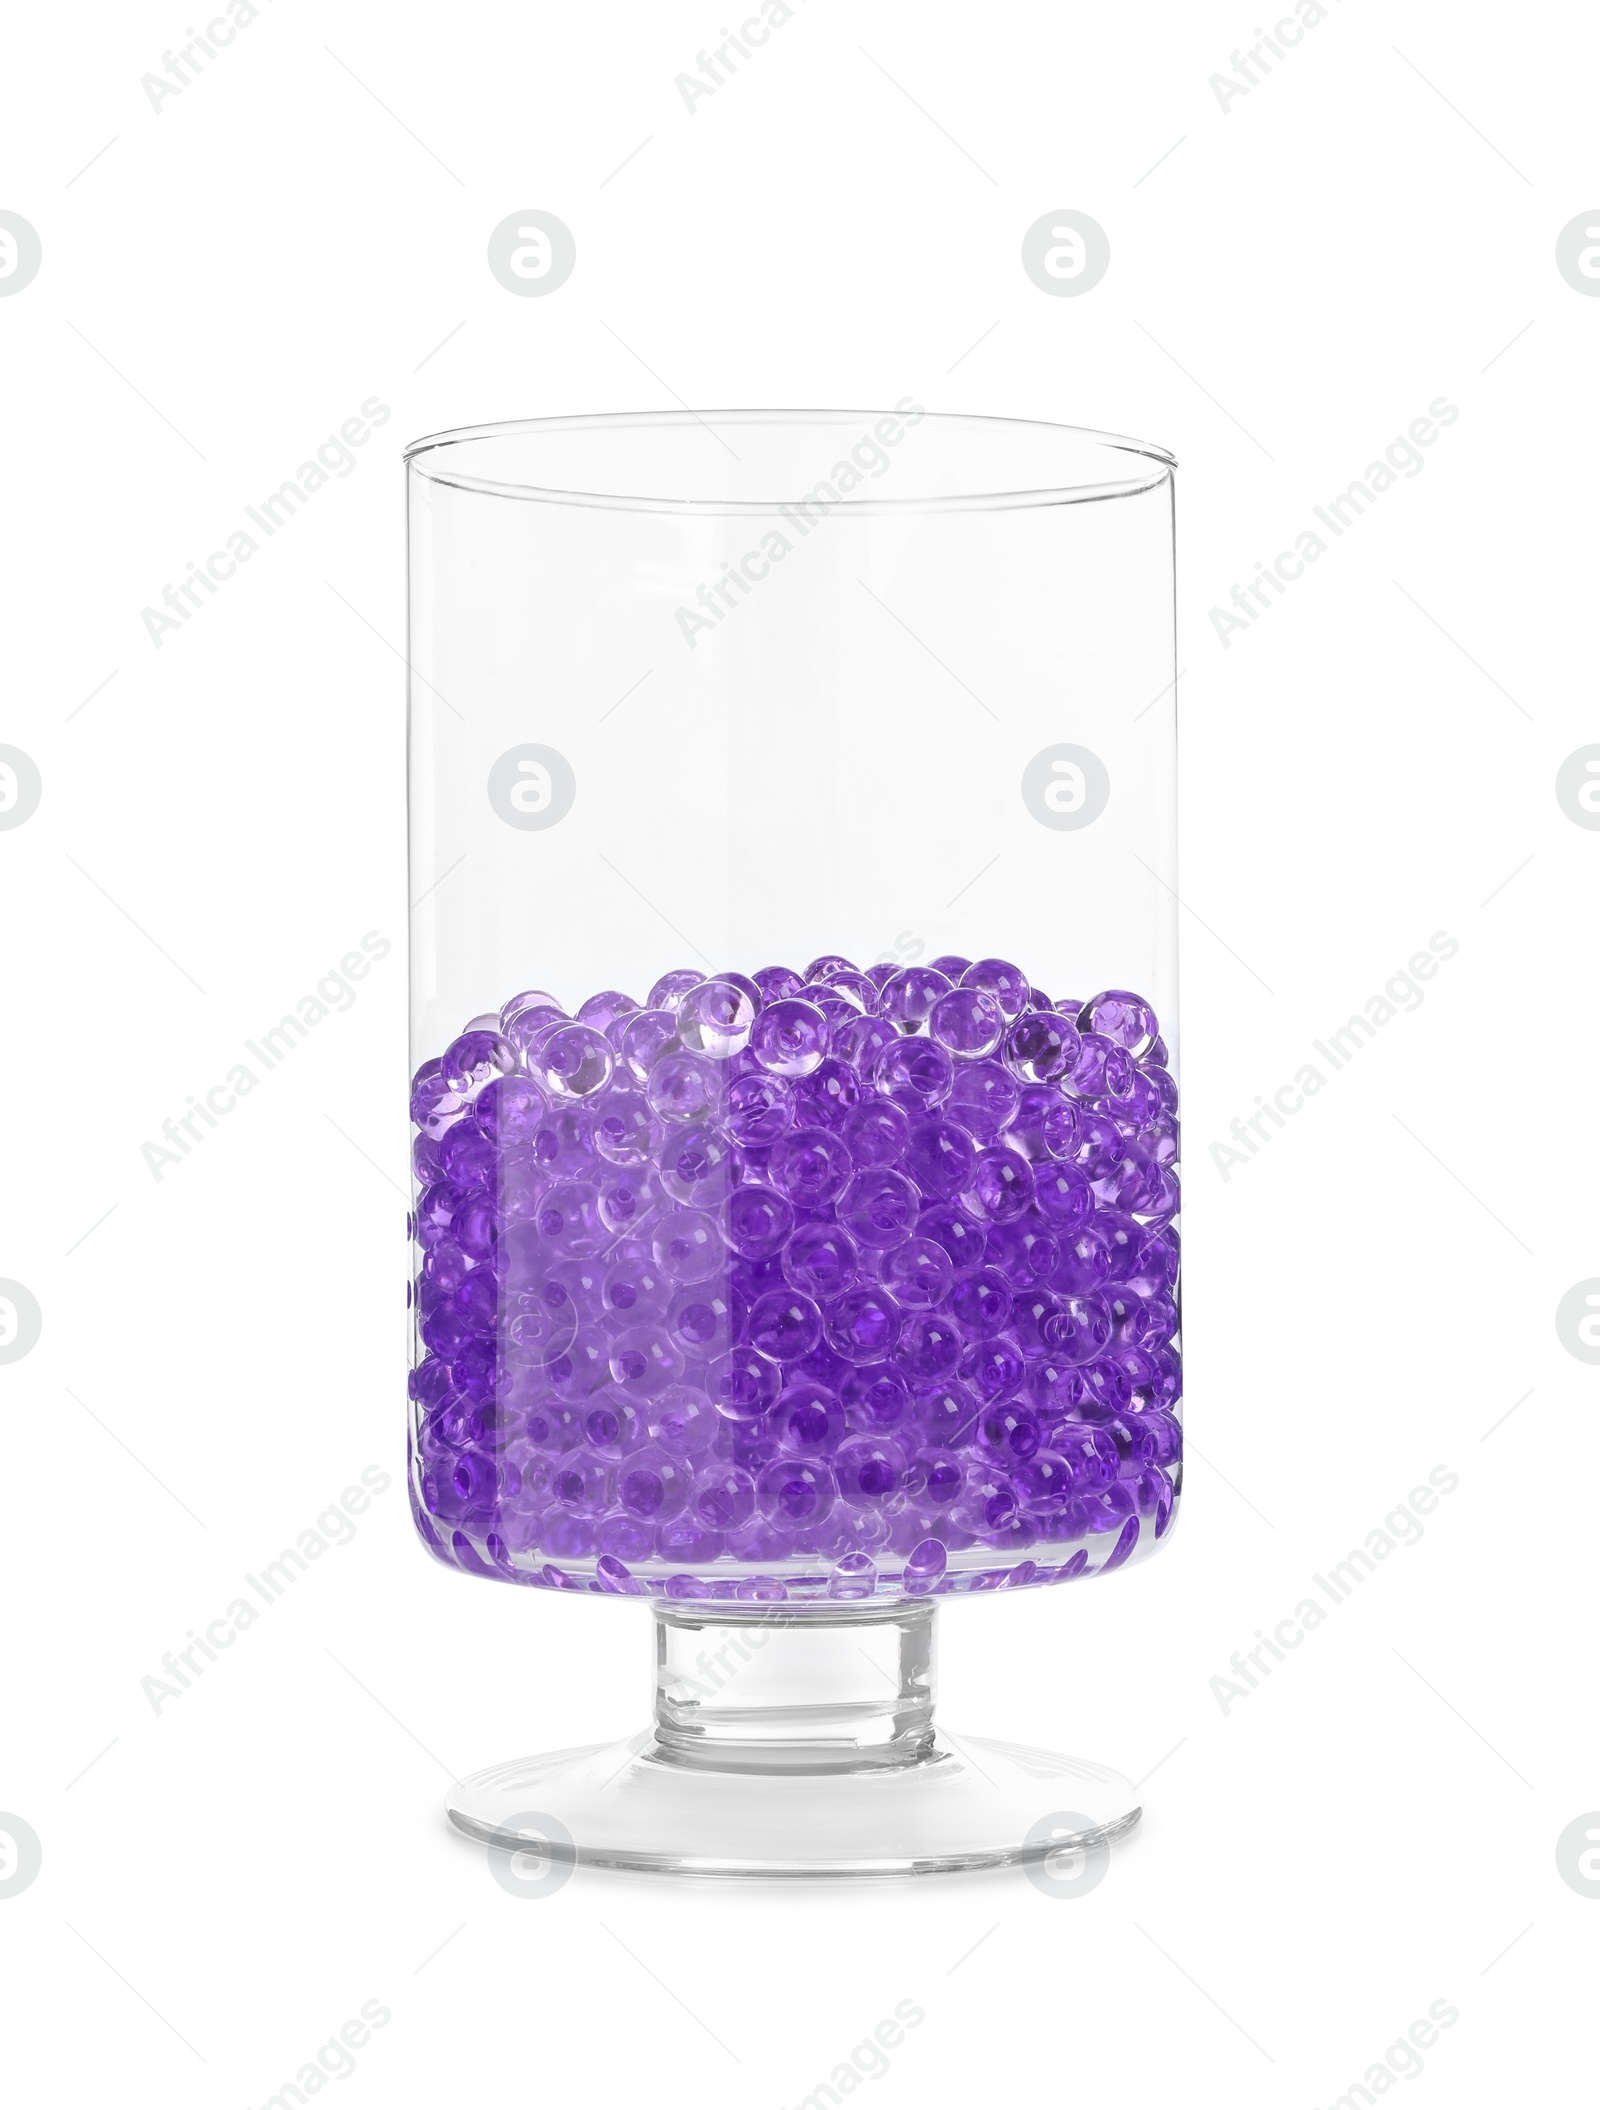 Photo of Violet filler in glass vase isolated on white. Water beads